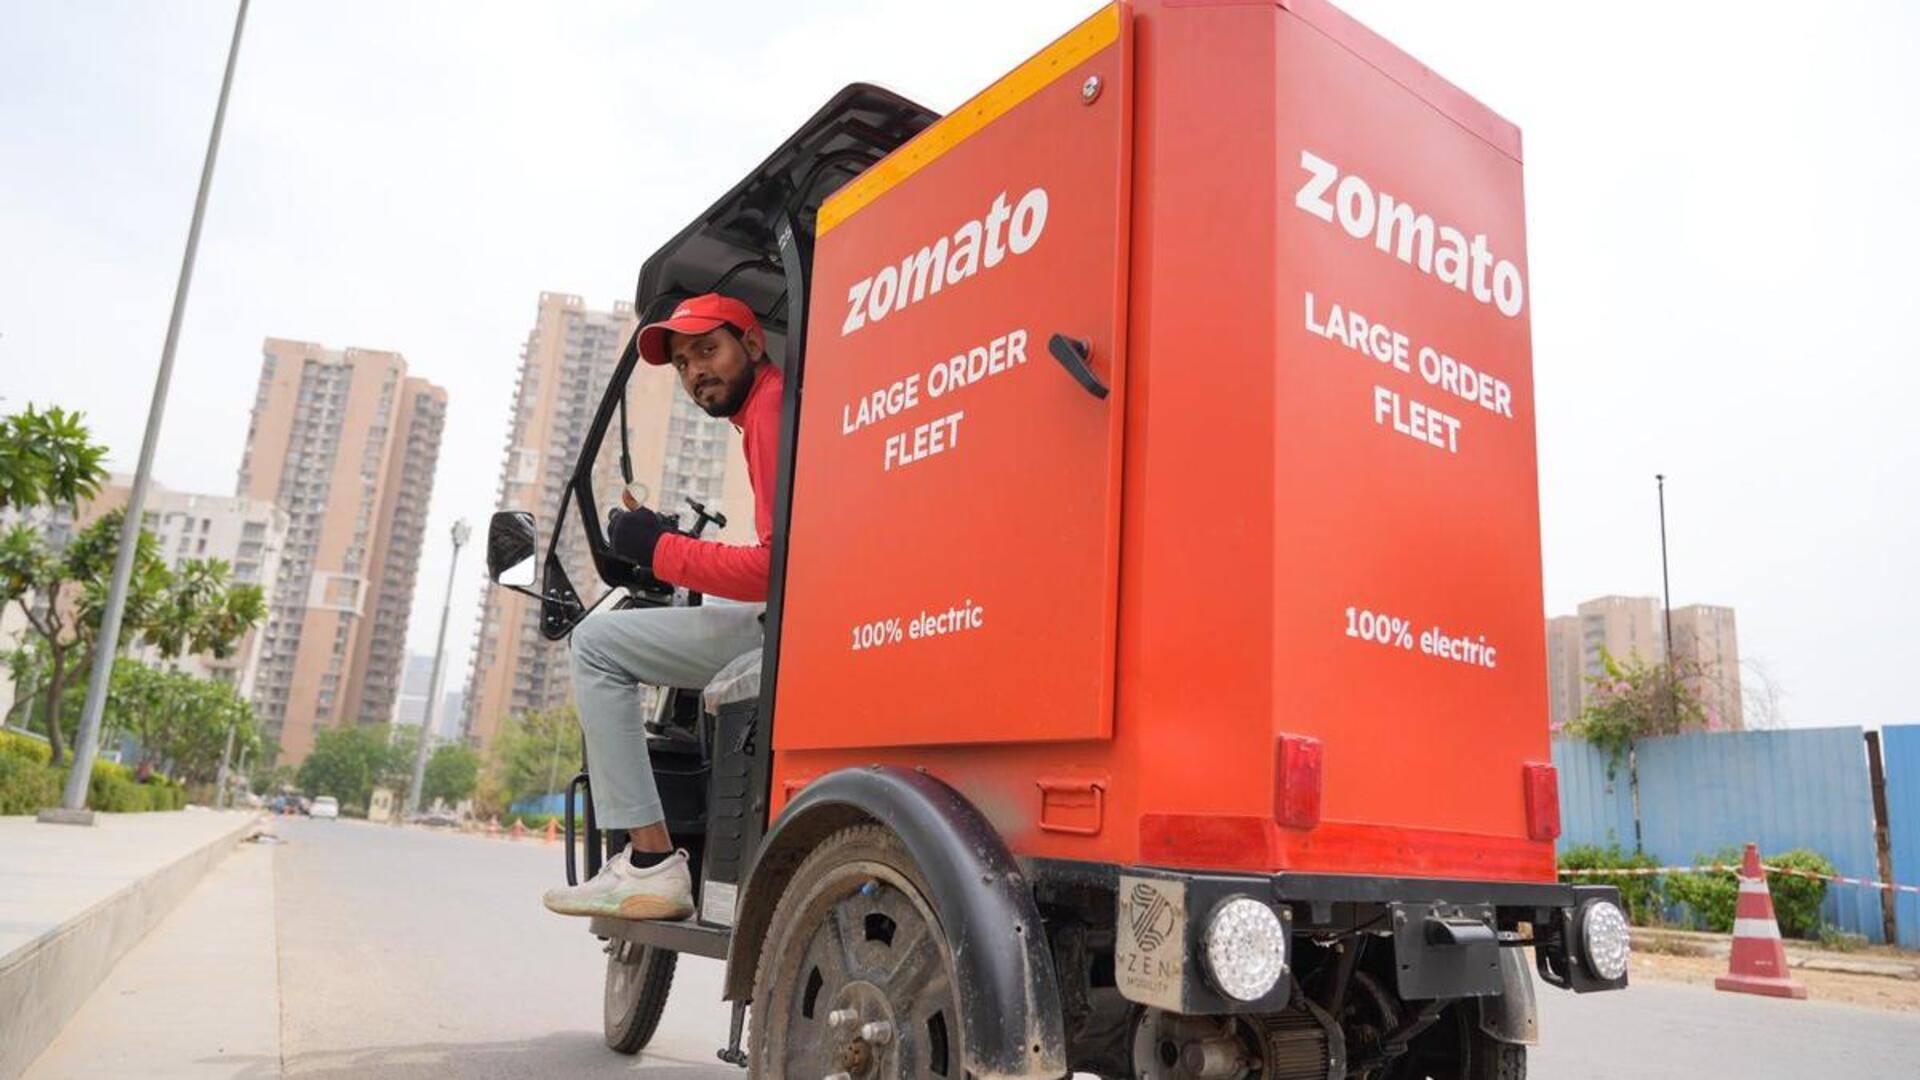 Zomato launches India's first large-order delivery fleet for big events